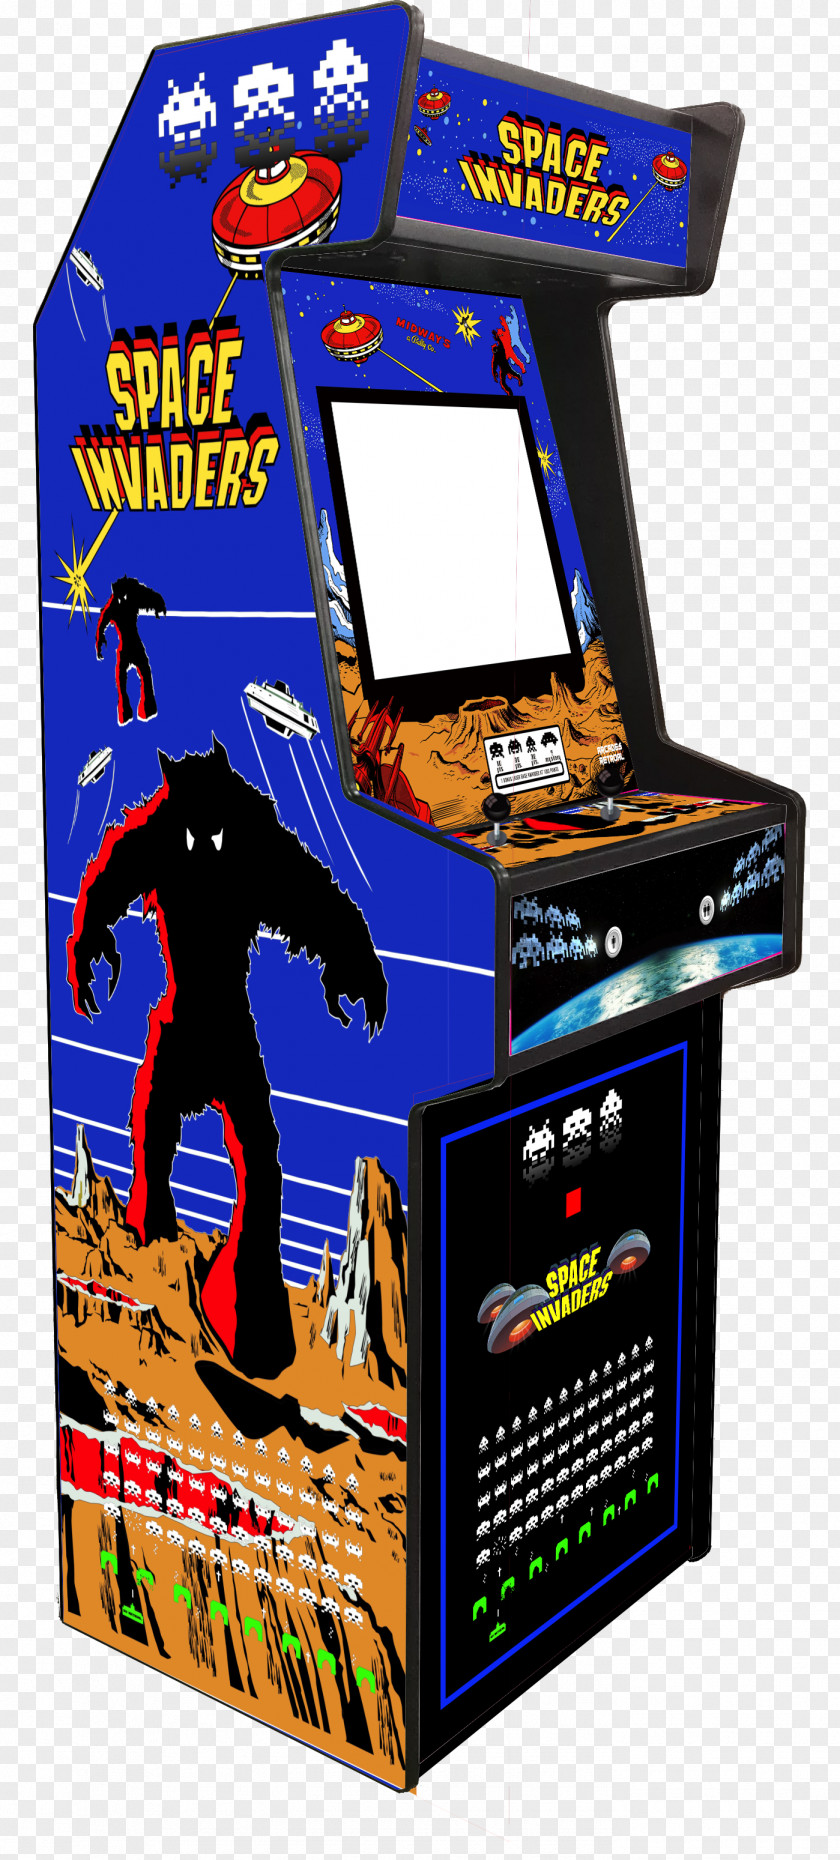 Space Invaders Arcade Cabinet DX Samurai Shodown IV Game PNG